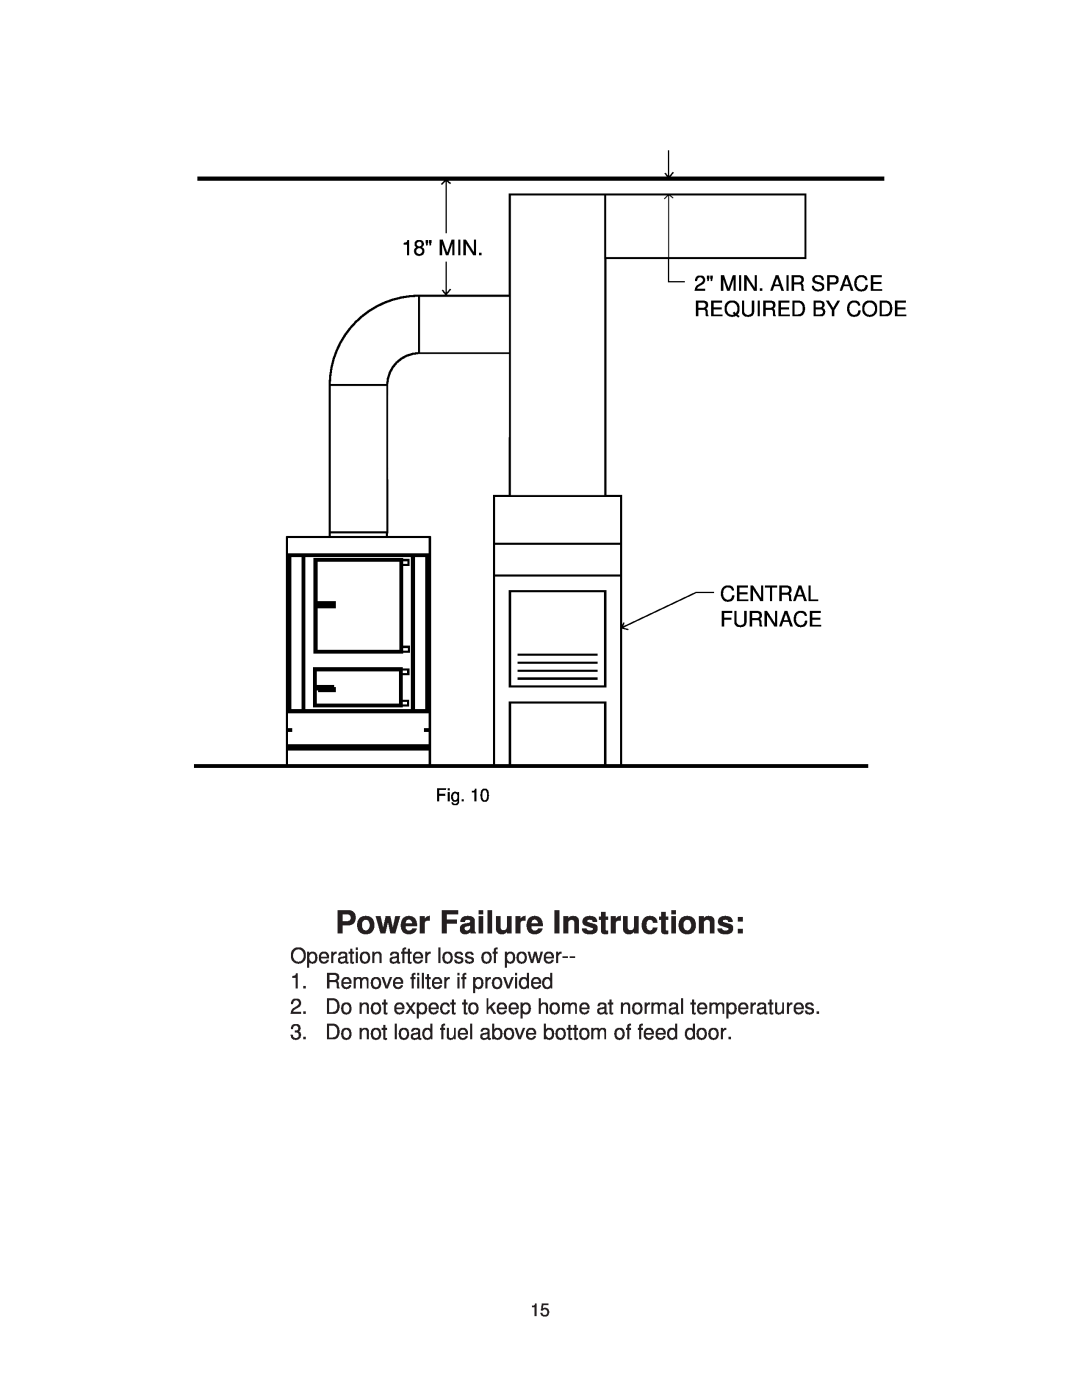 United States Stove 1303 Power Failure Instructions, 18 MIN, 2 MIN. AIR SPACE, Required By Code, Central Furnace 